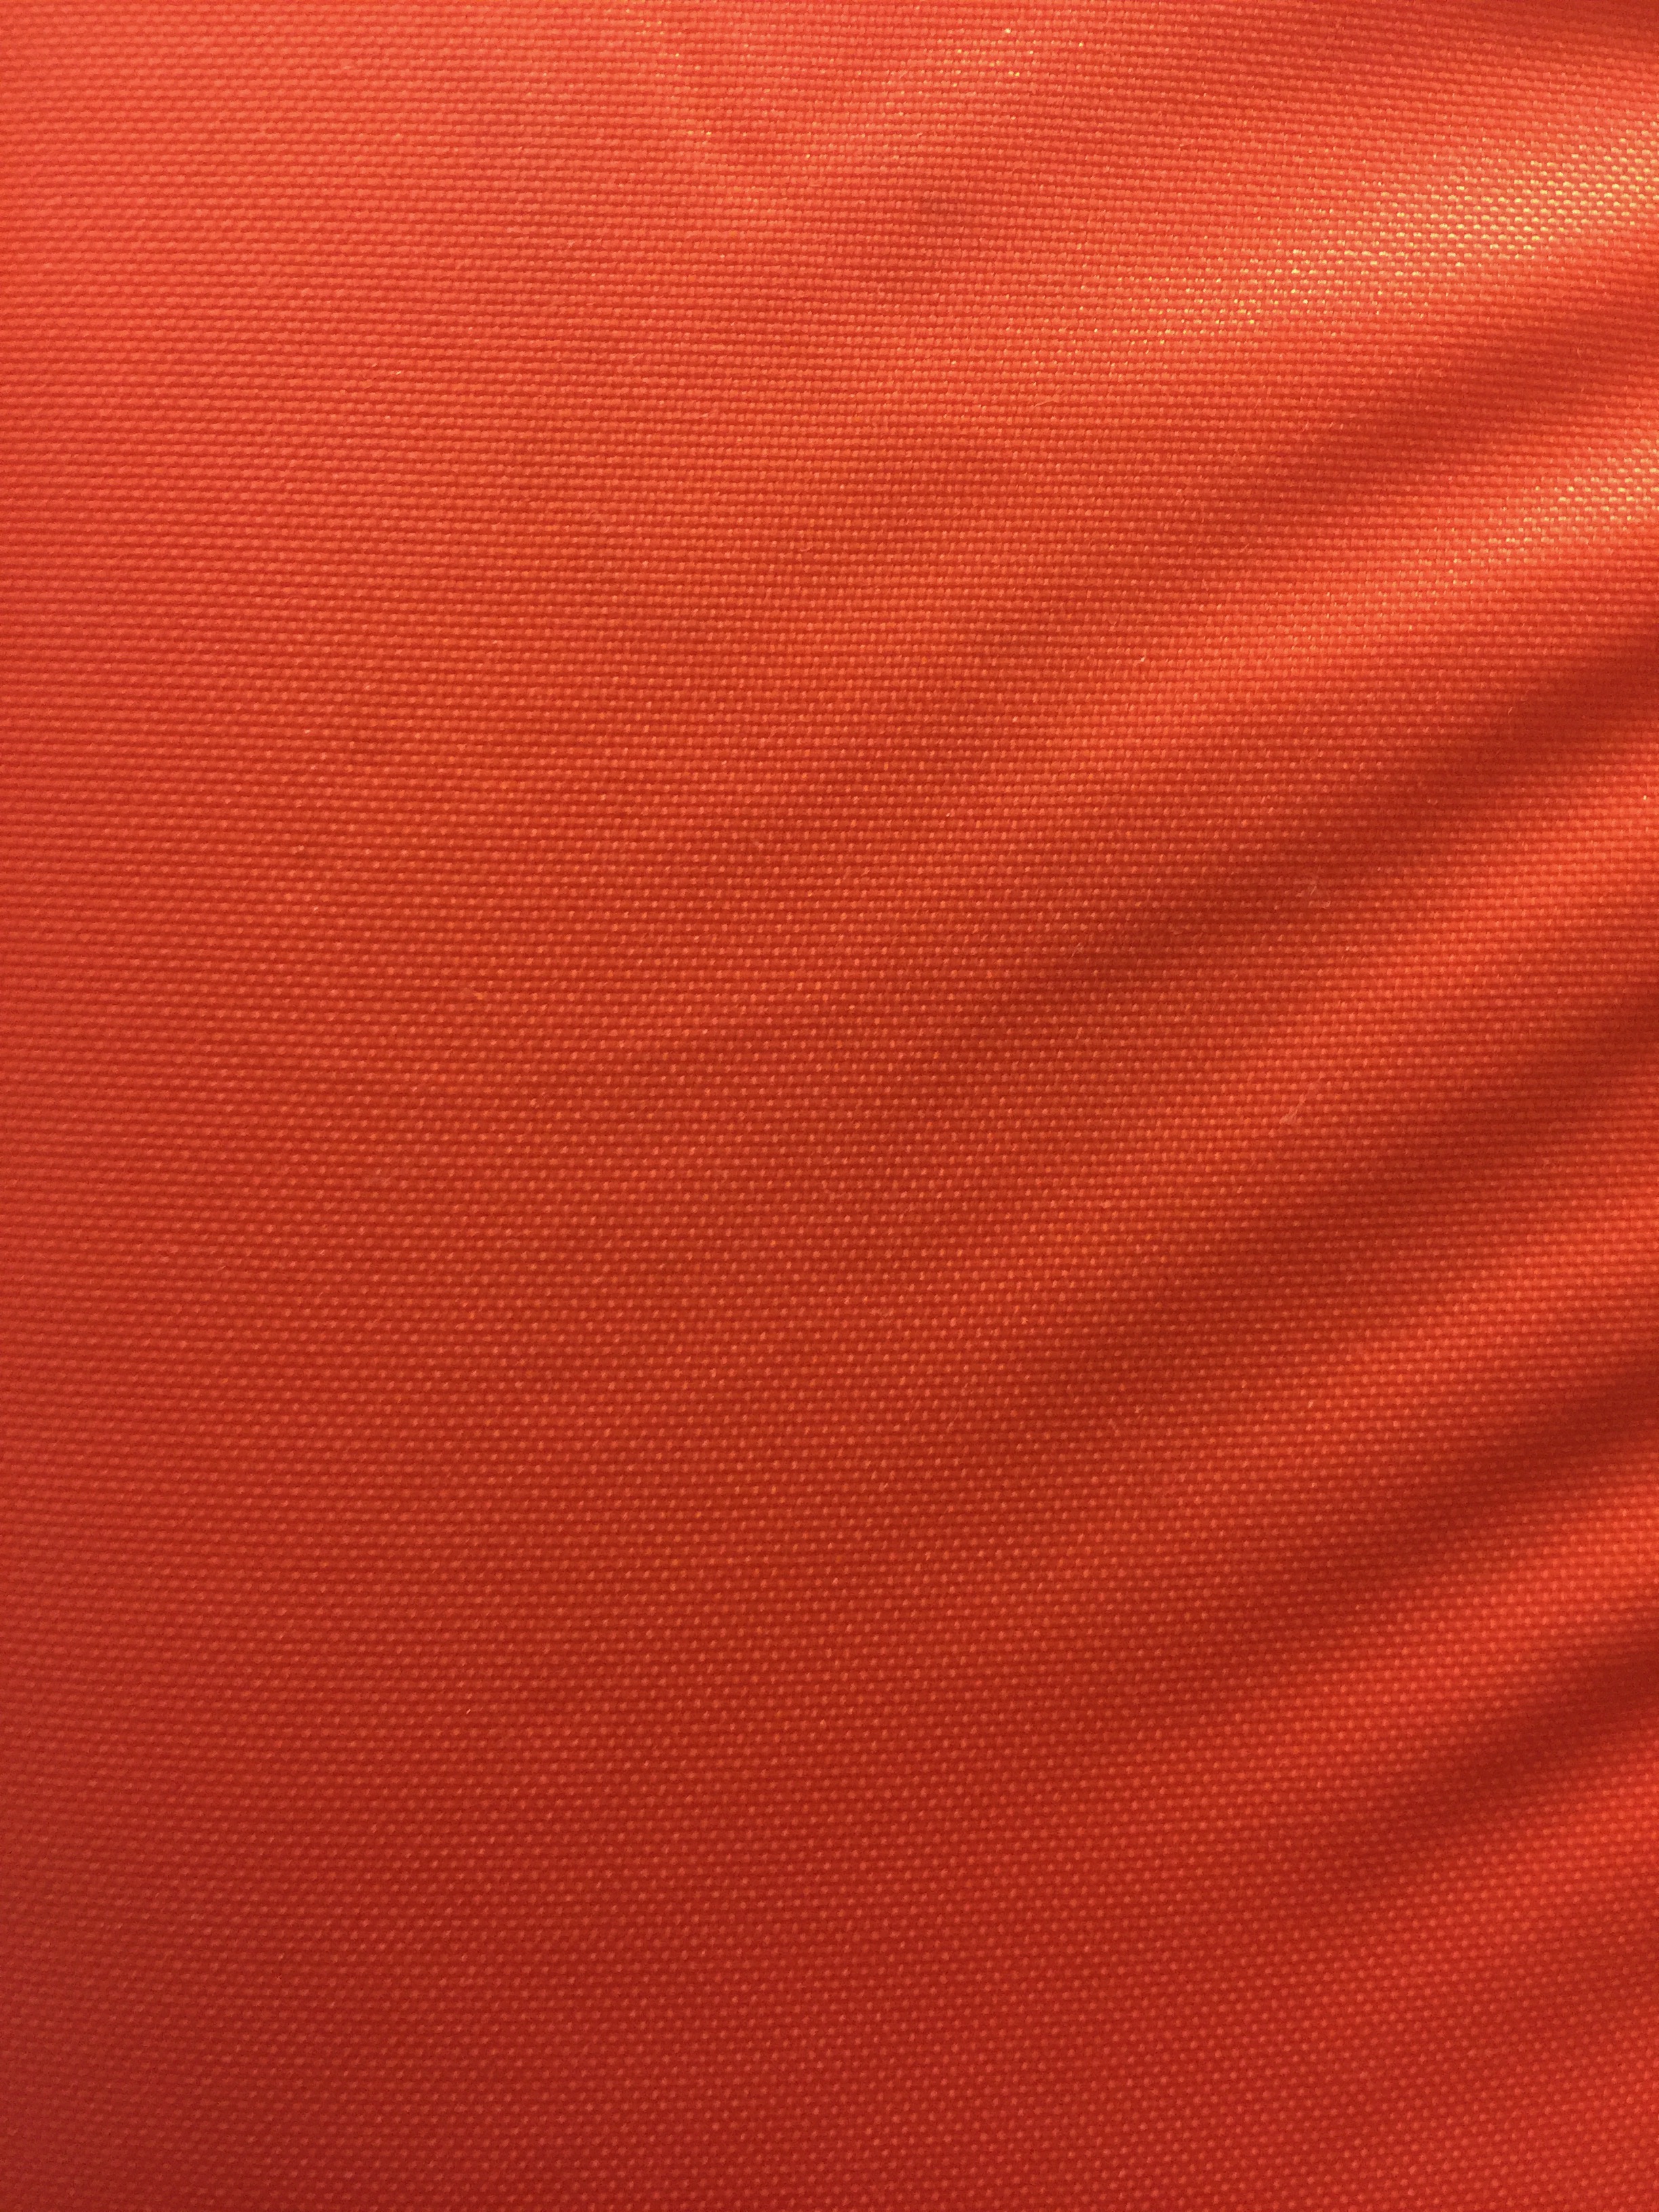 Orange red plastic sheet with dotted texture Free Textures